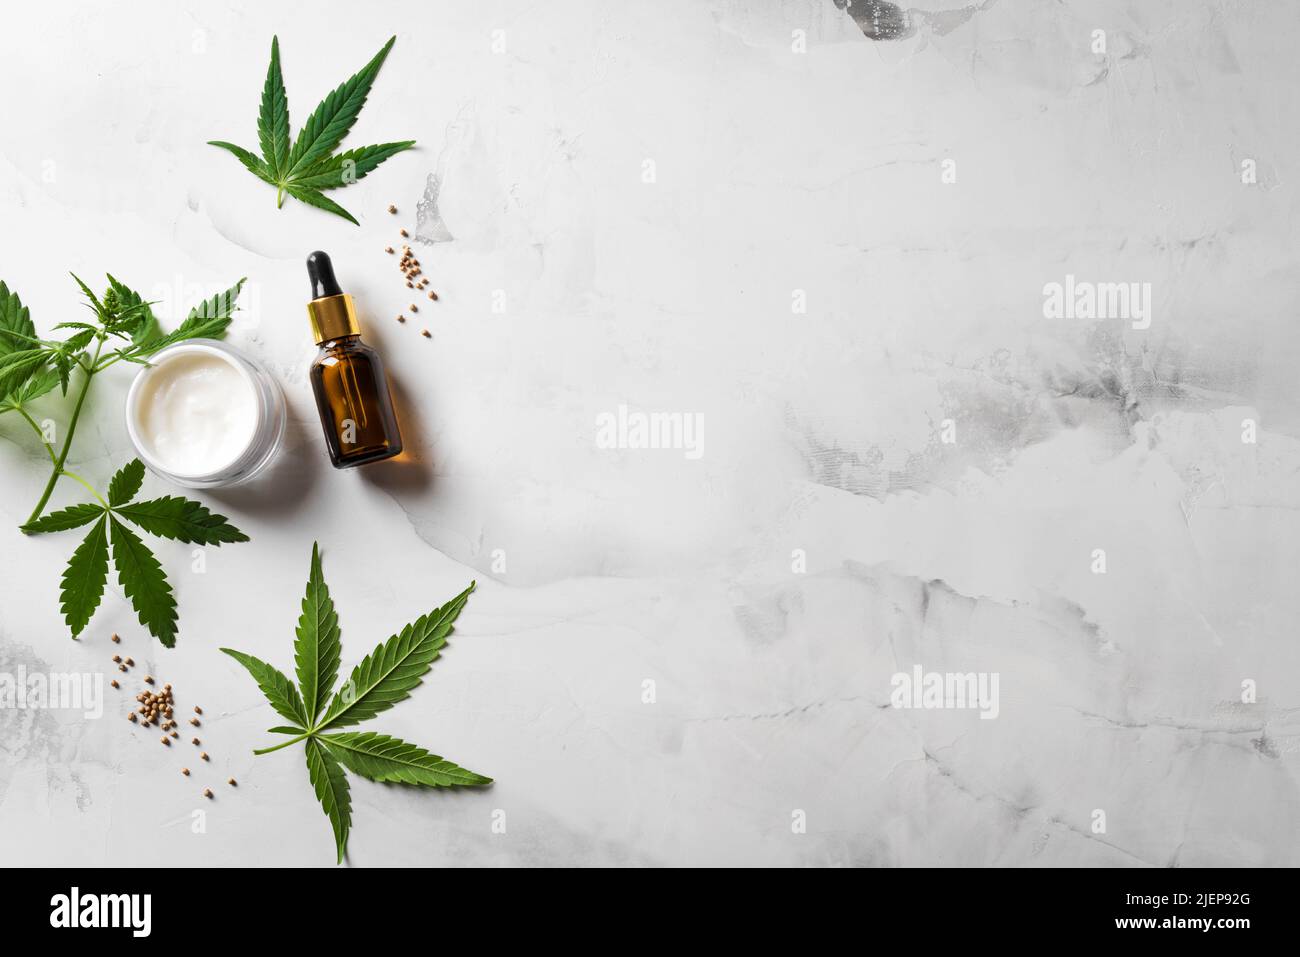 Hemp cannabis oil, leaves and beauty products, cbd oil in bottle, face creme and serum, alternative medicine and organic skin care concept. Copy space Stock Photo